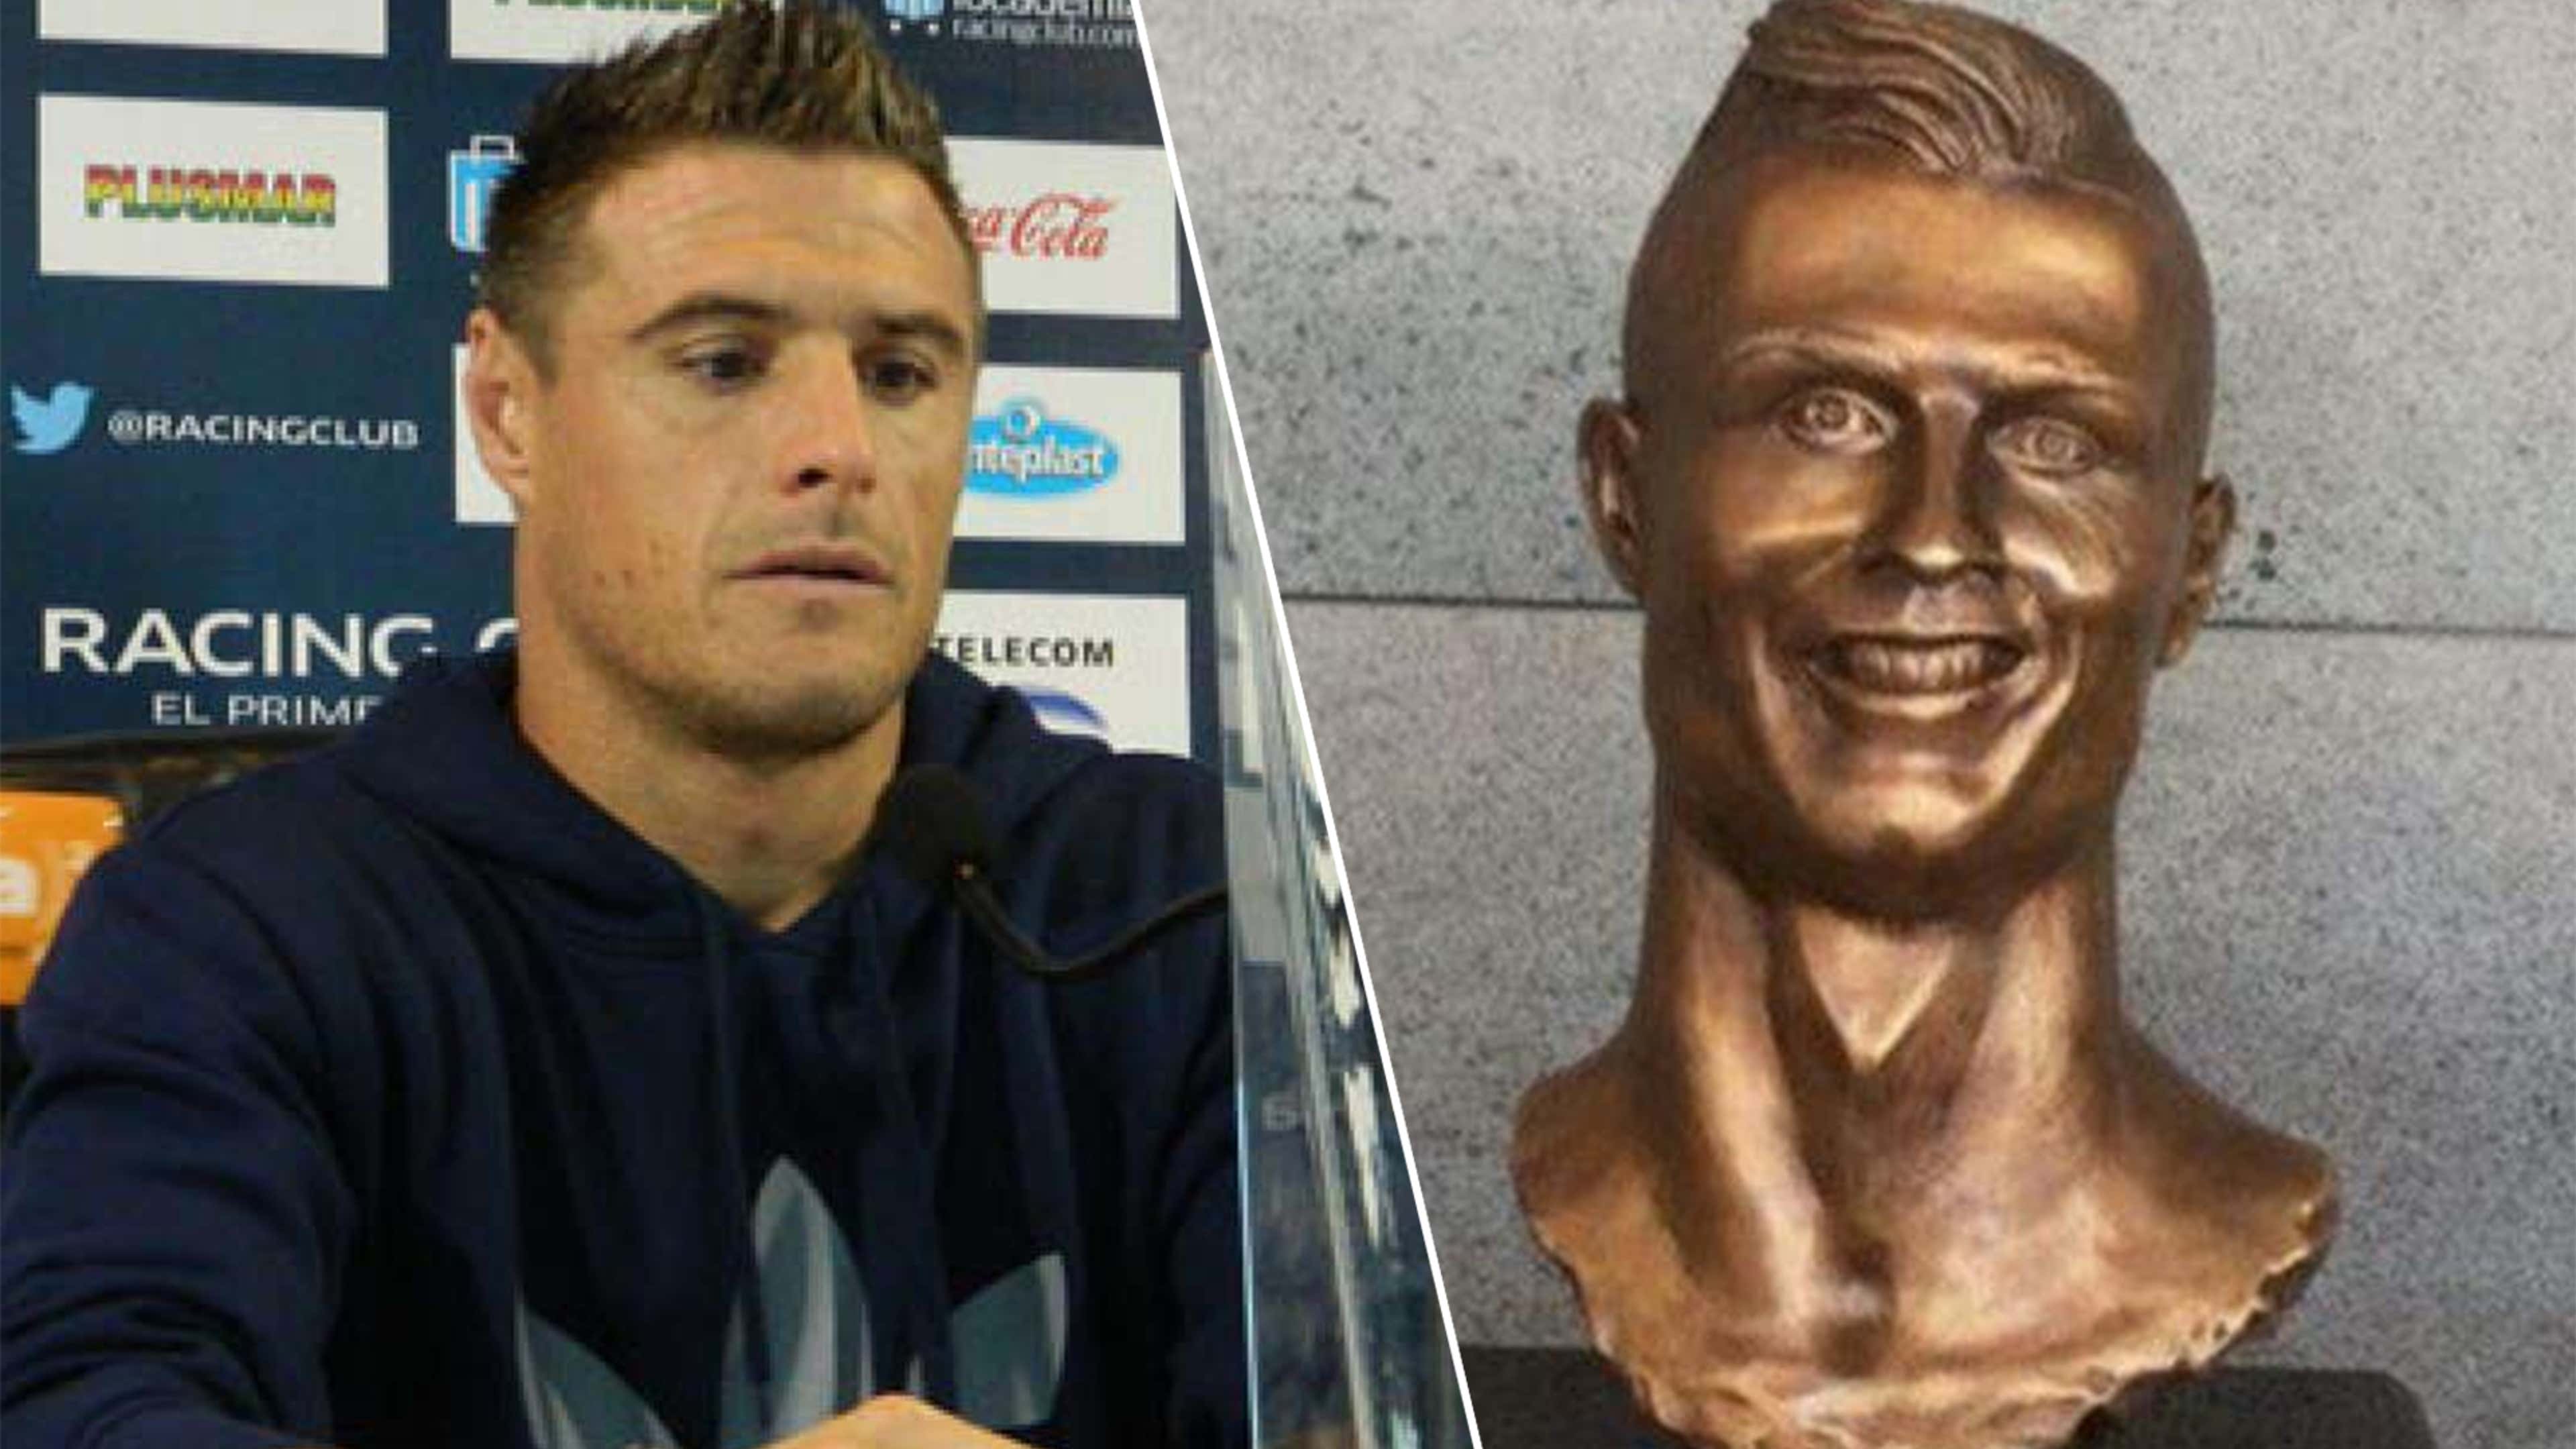 Racing defender Pillud mocked for resemblance to bizarre Ronaldo bust